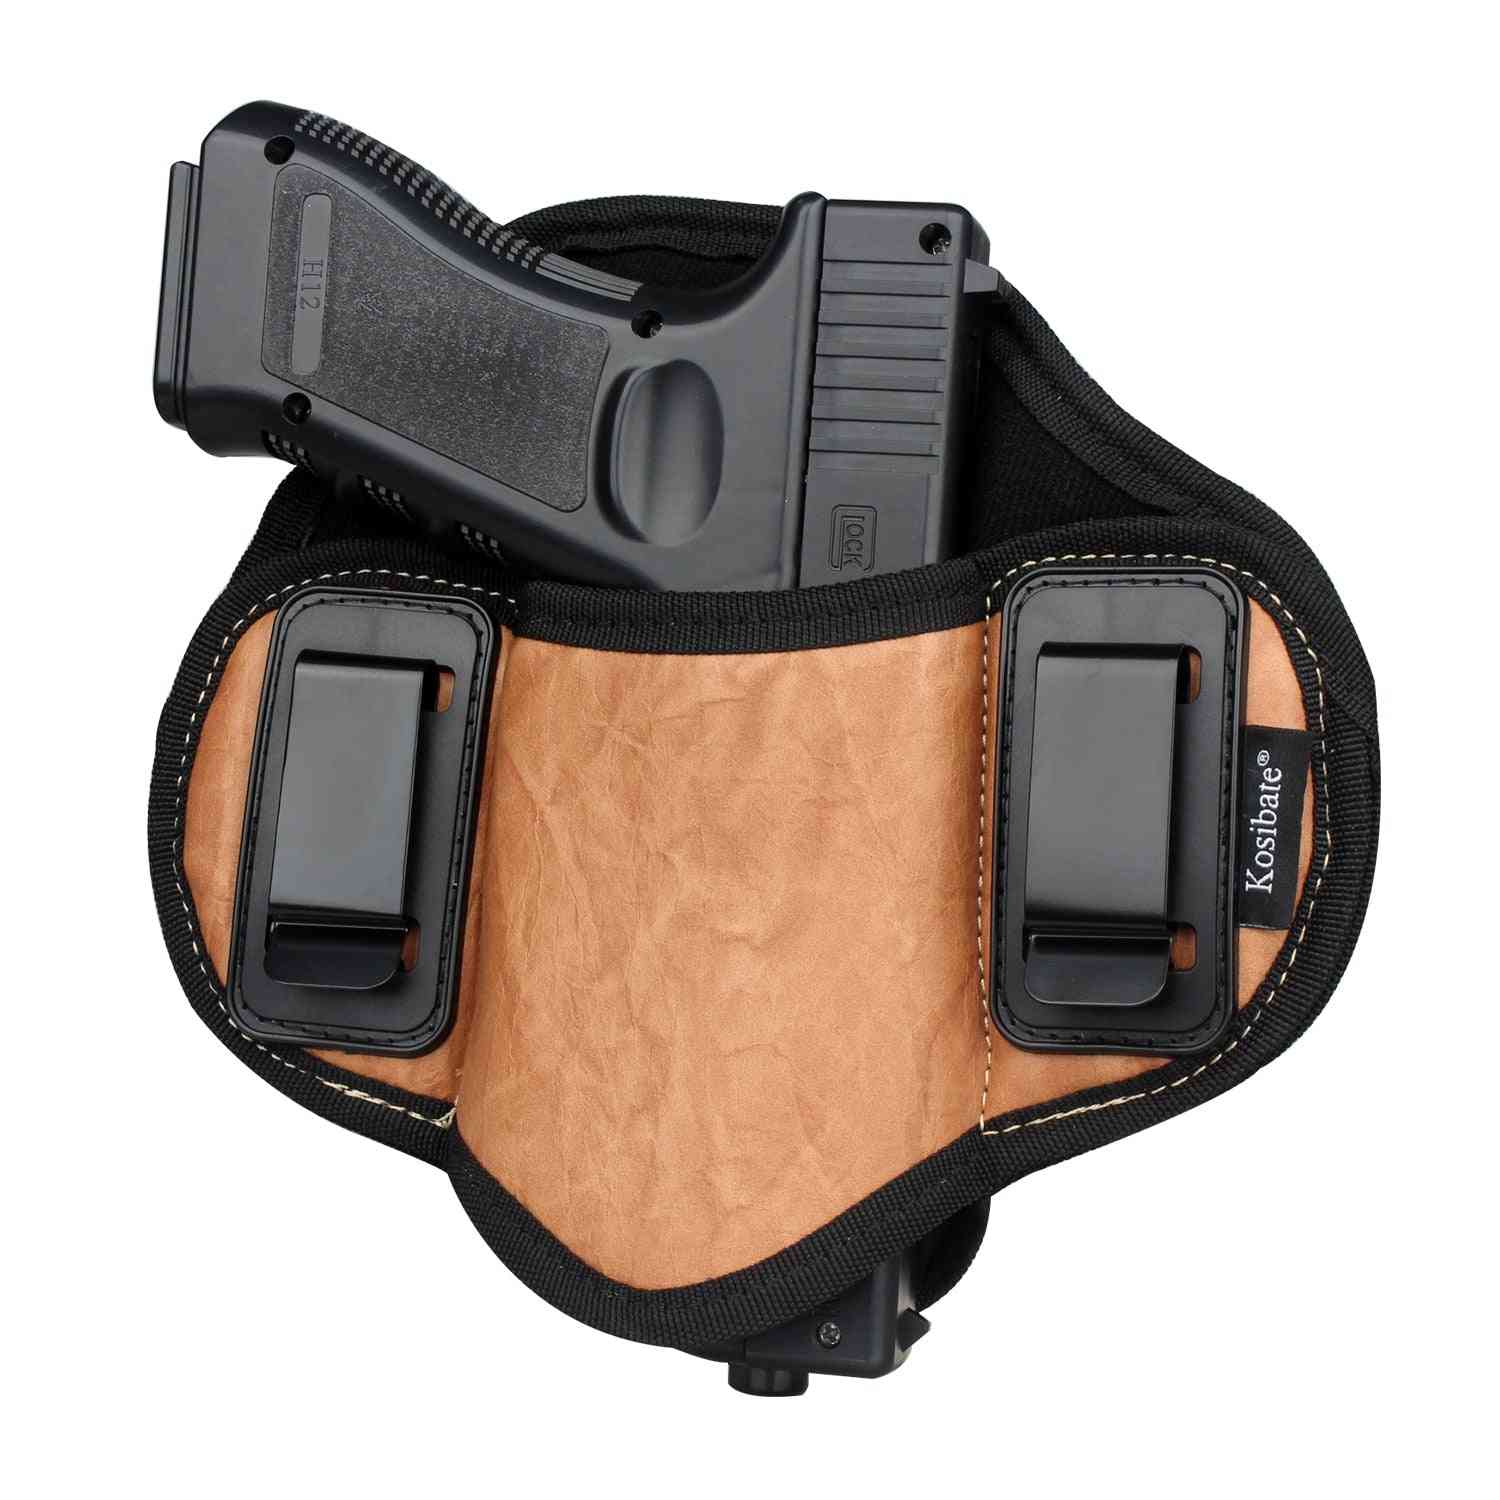 Hunting Holster Pu Leather Concealed For Gun/pistol